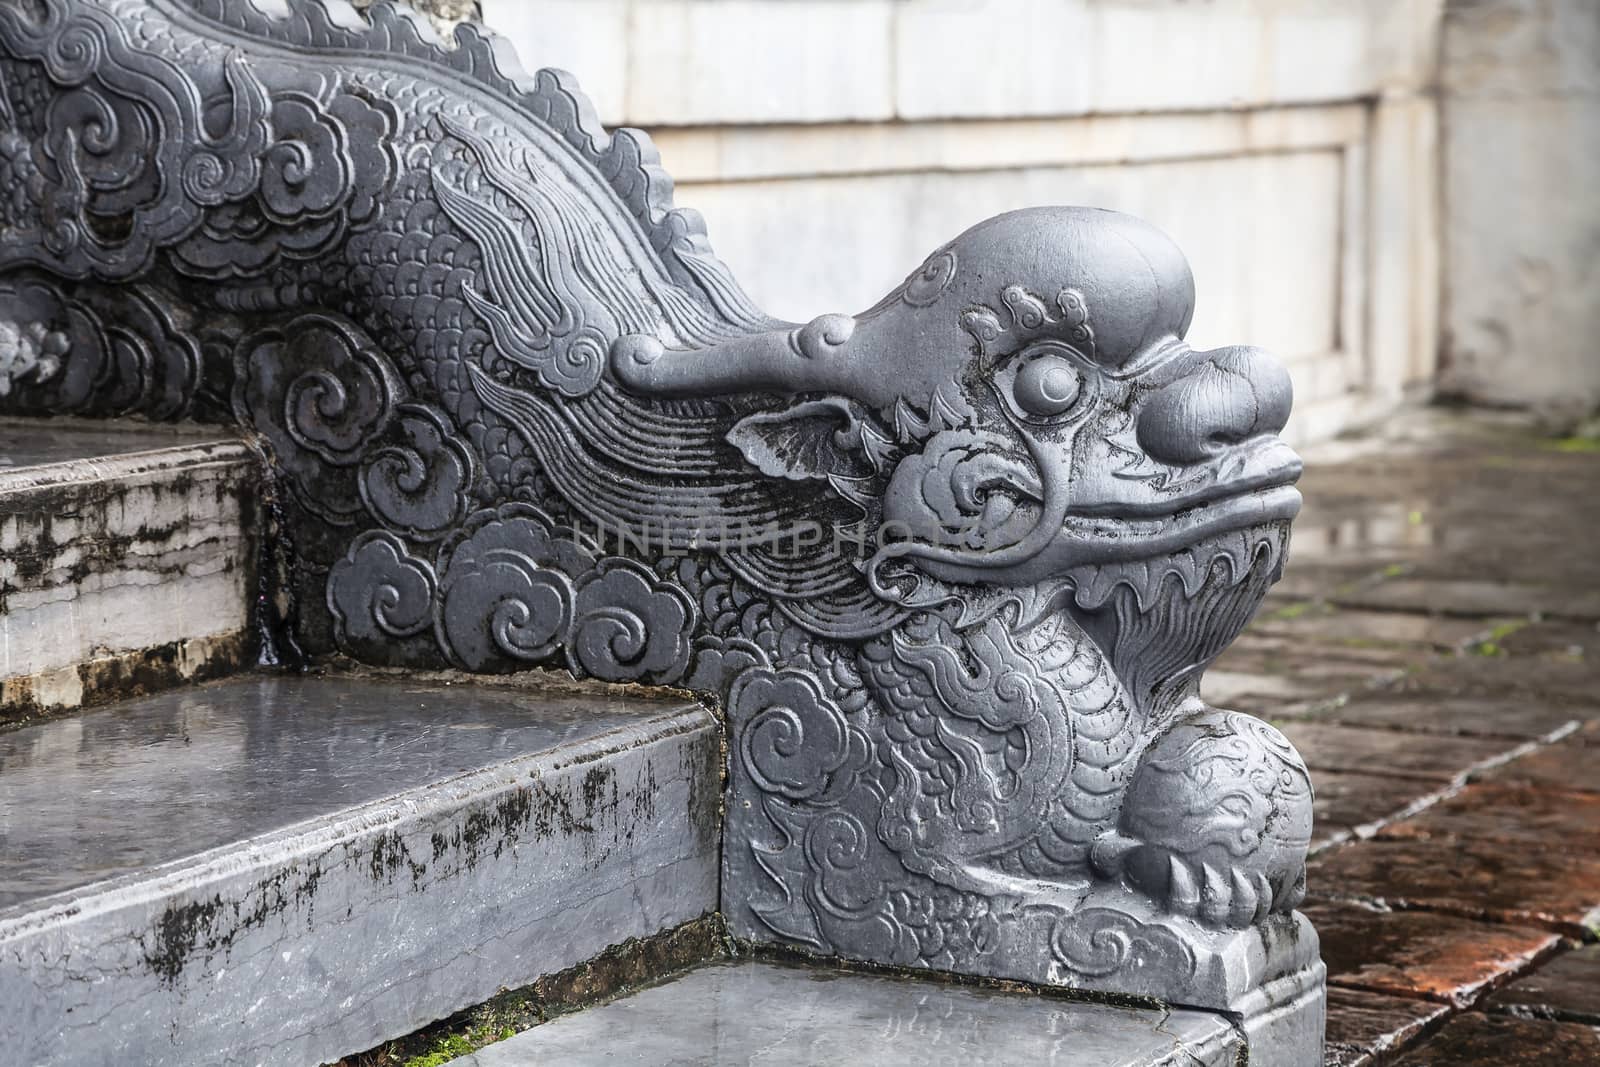 Dragon-shaped handrail in Hue Imperial Palace by Goodday